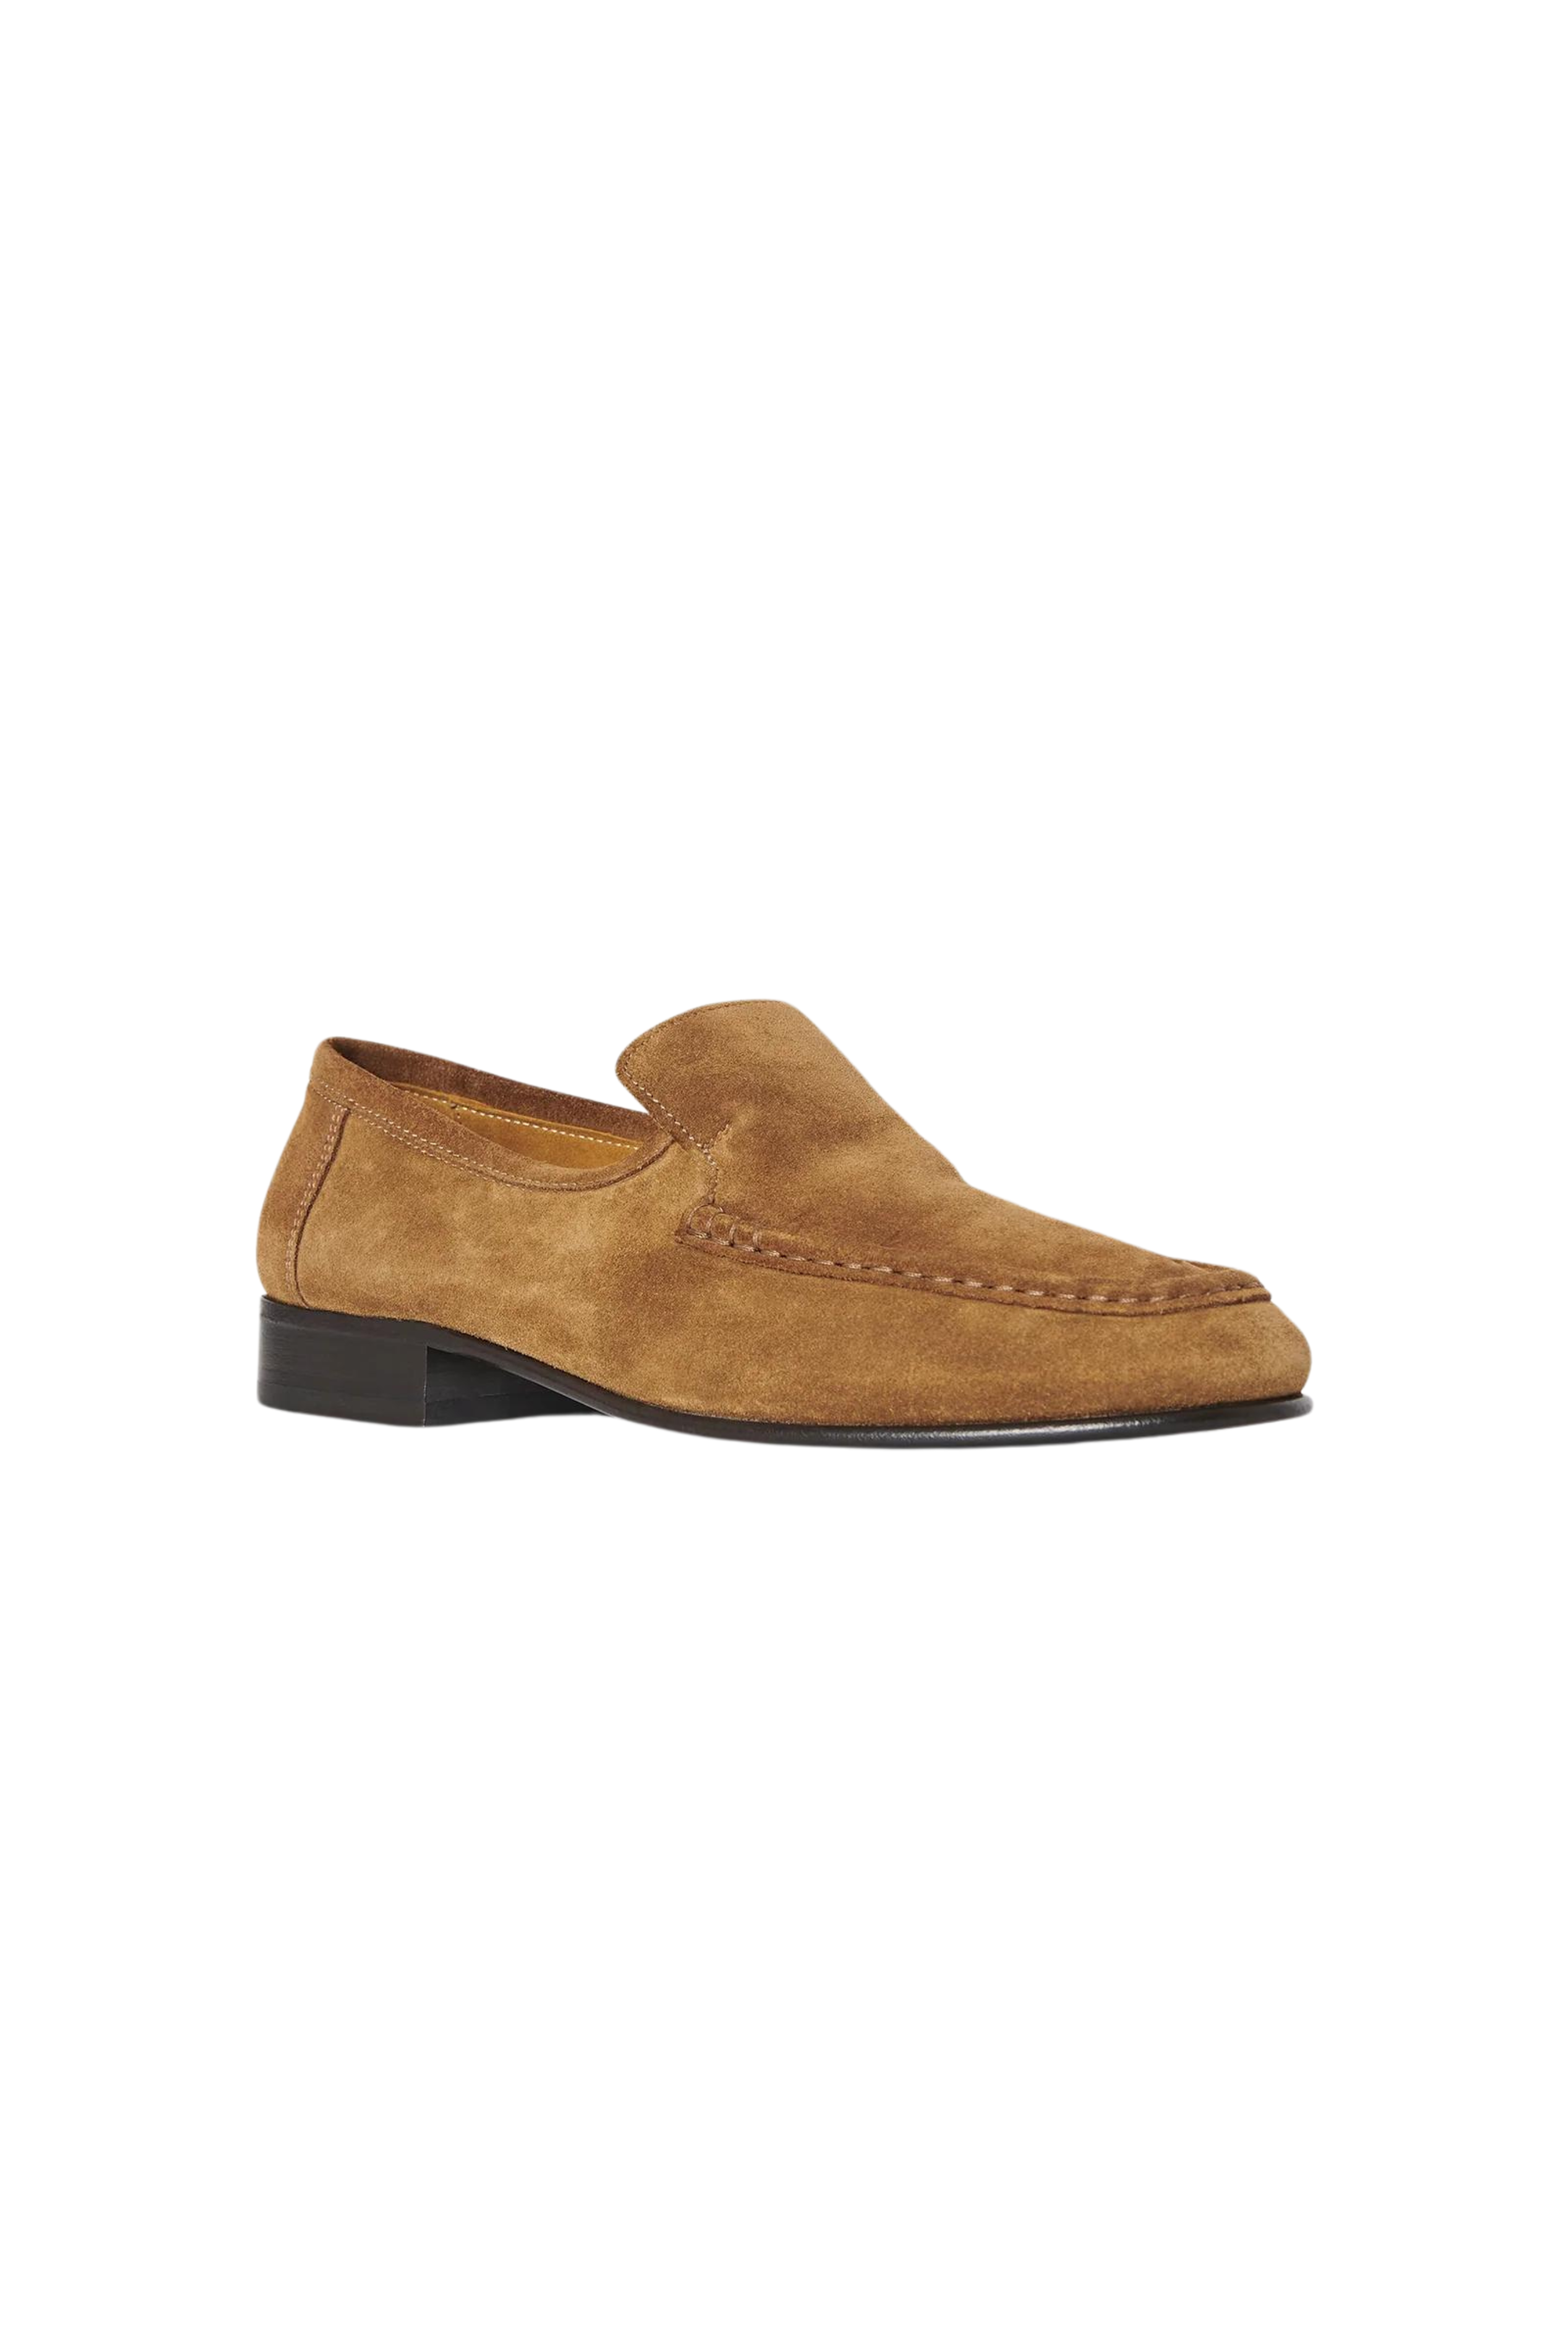 THE ROW New Soft Suede Loafers